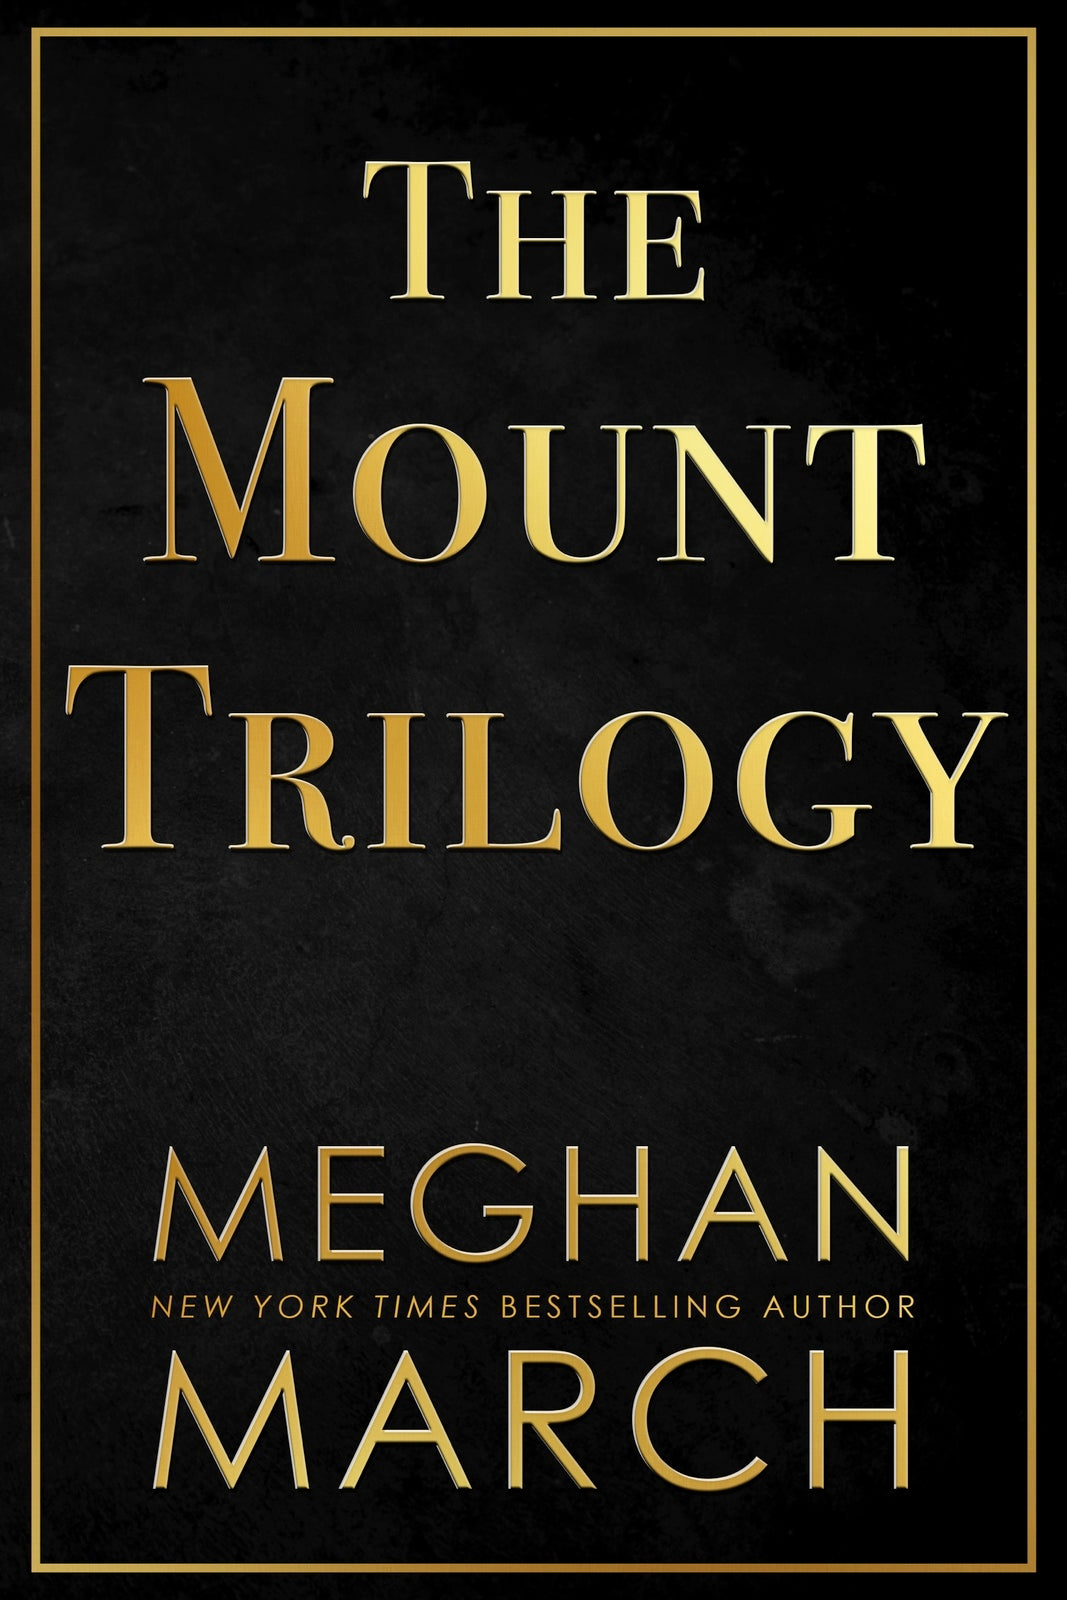 The Mount Trilogy